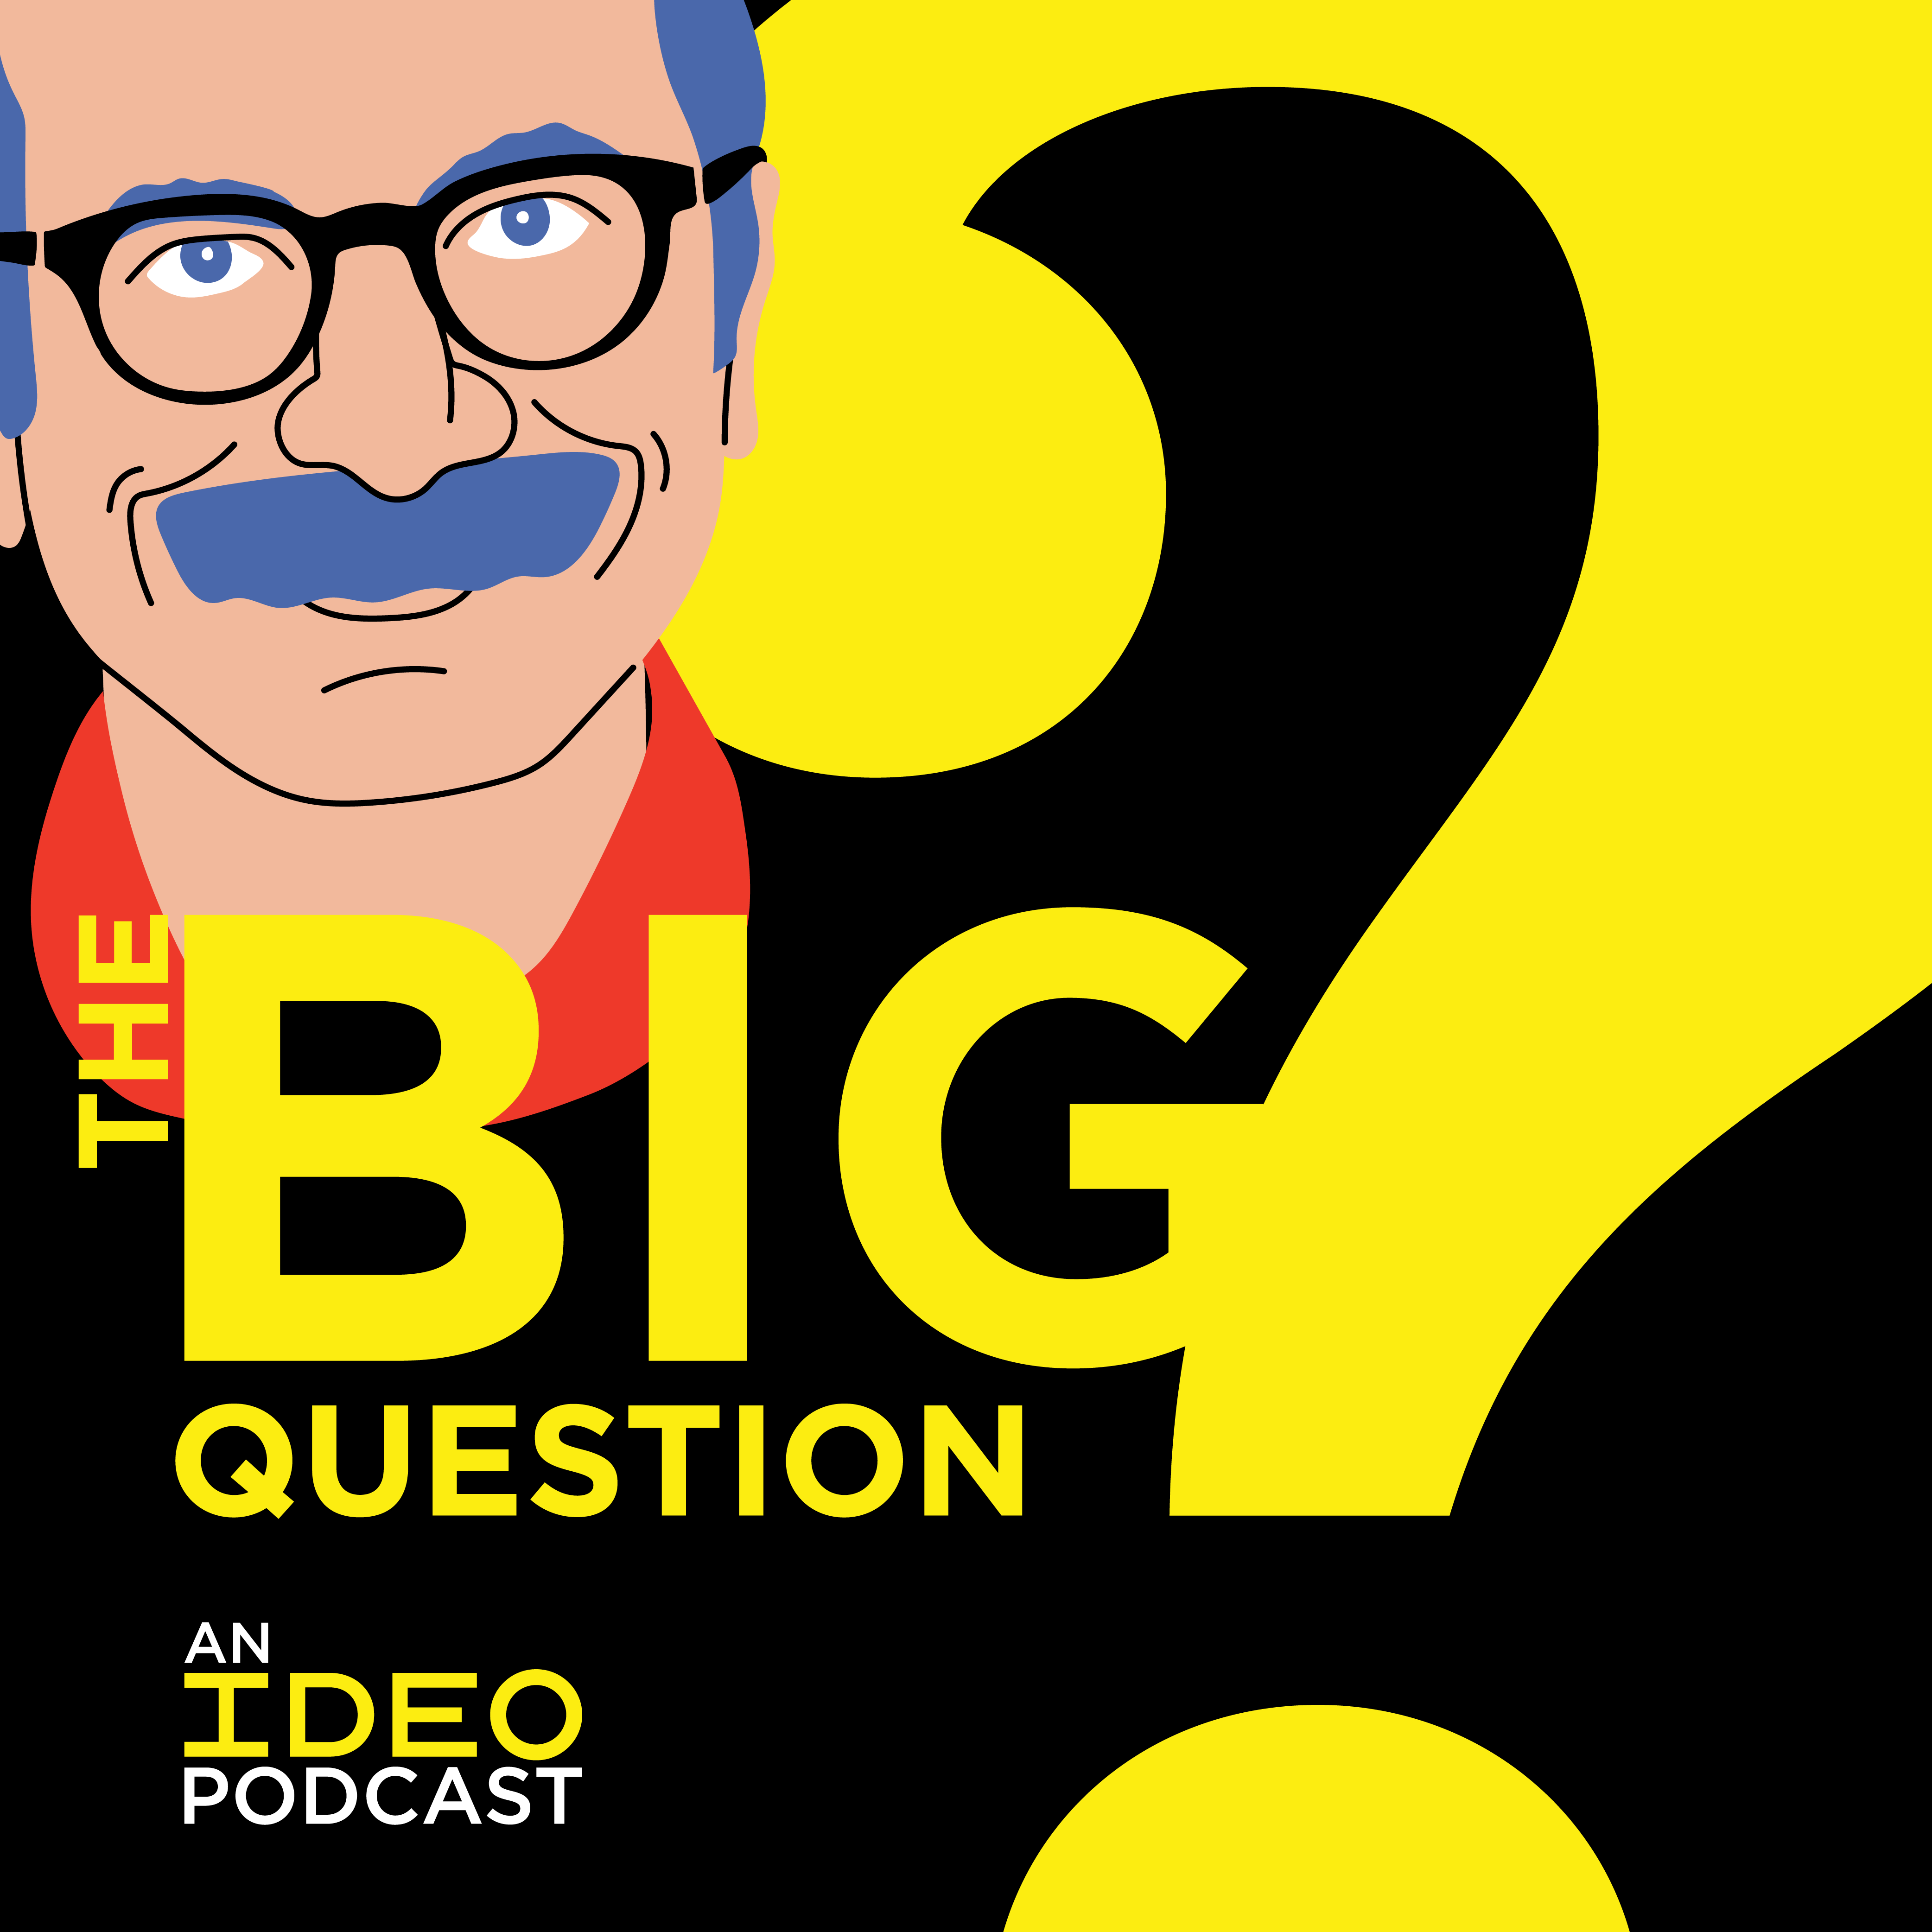 What Happens If We Don't Ask Big Questions?